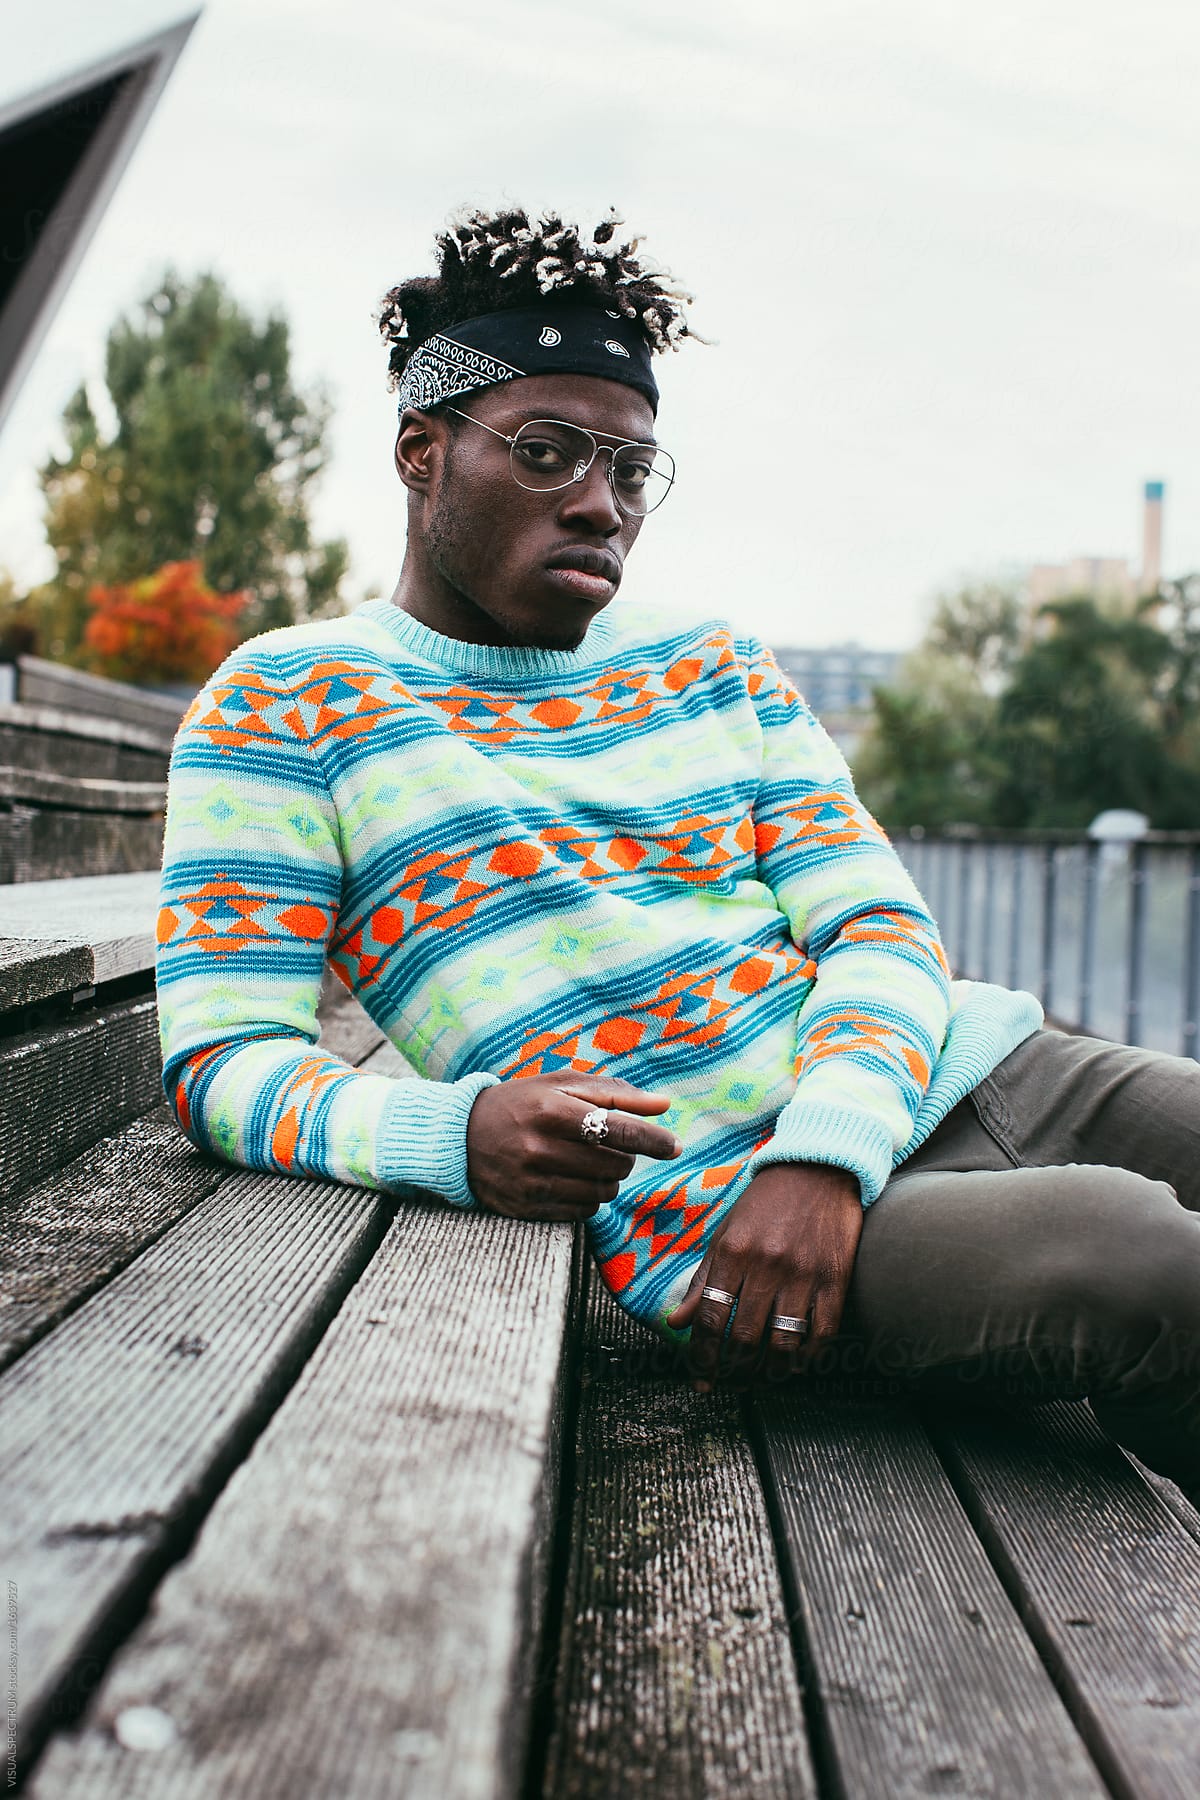 Outdoor Autumn Portrait of Young Black Man Wearing Colorful Jump